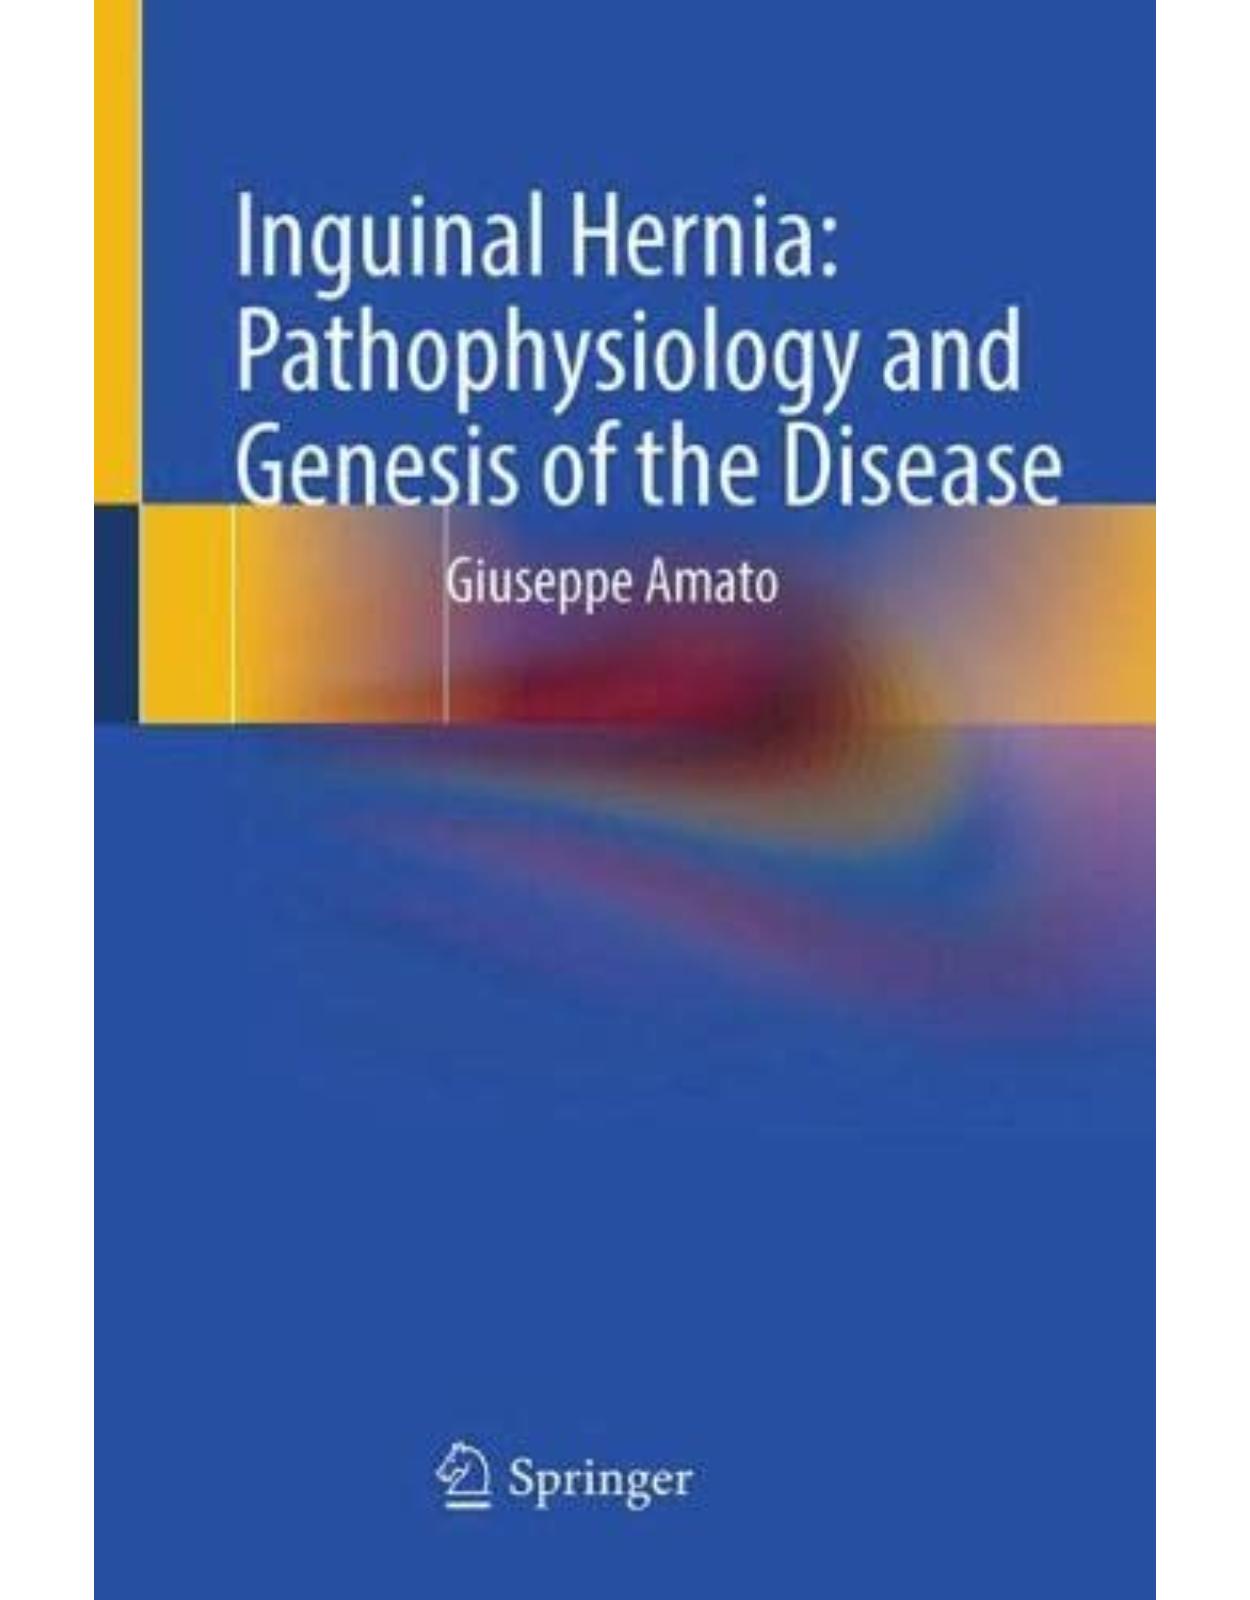 Inguinal Hernia: Pathophysiology and Genesis of the Disease